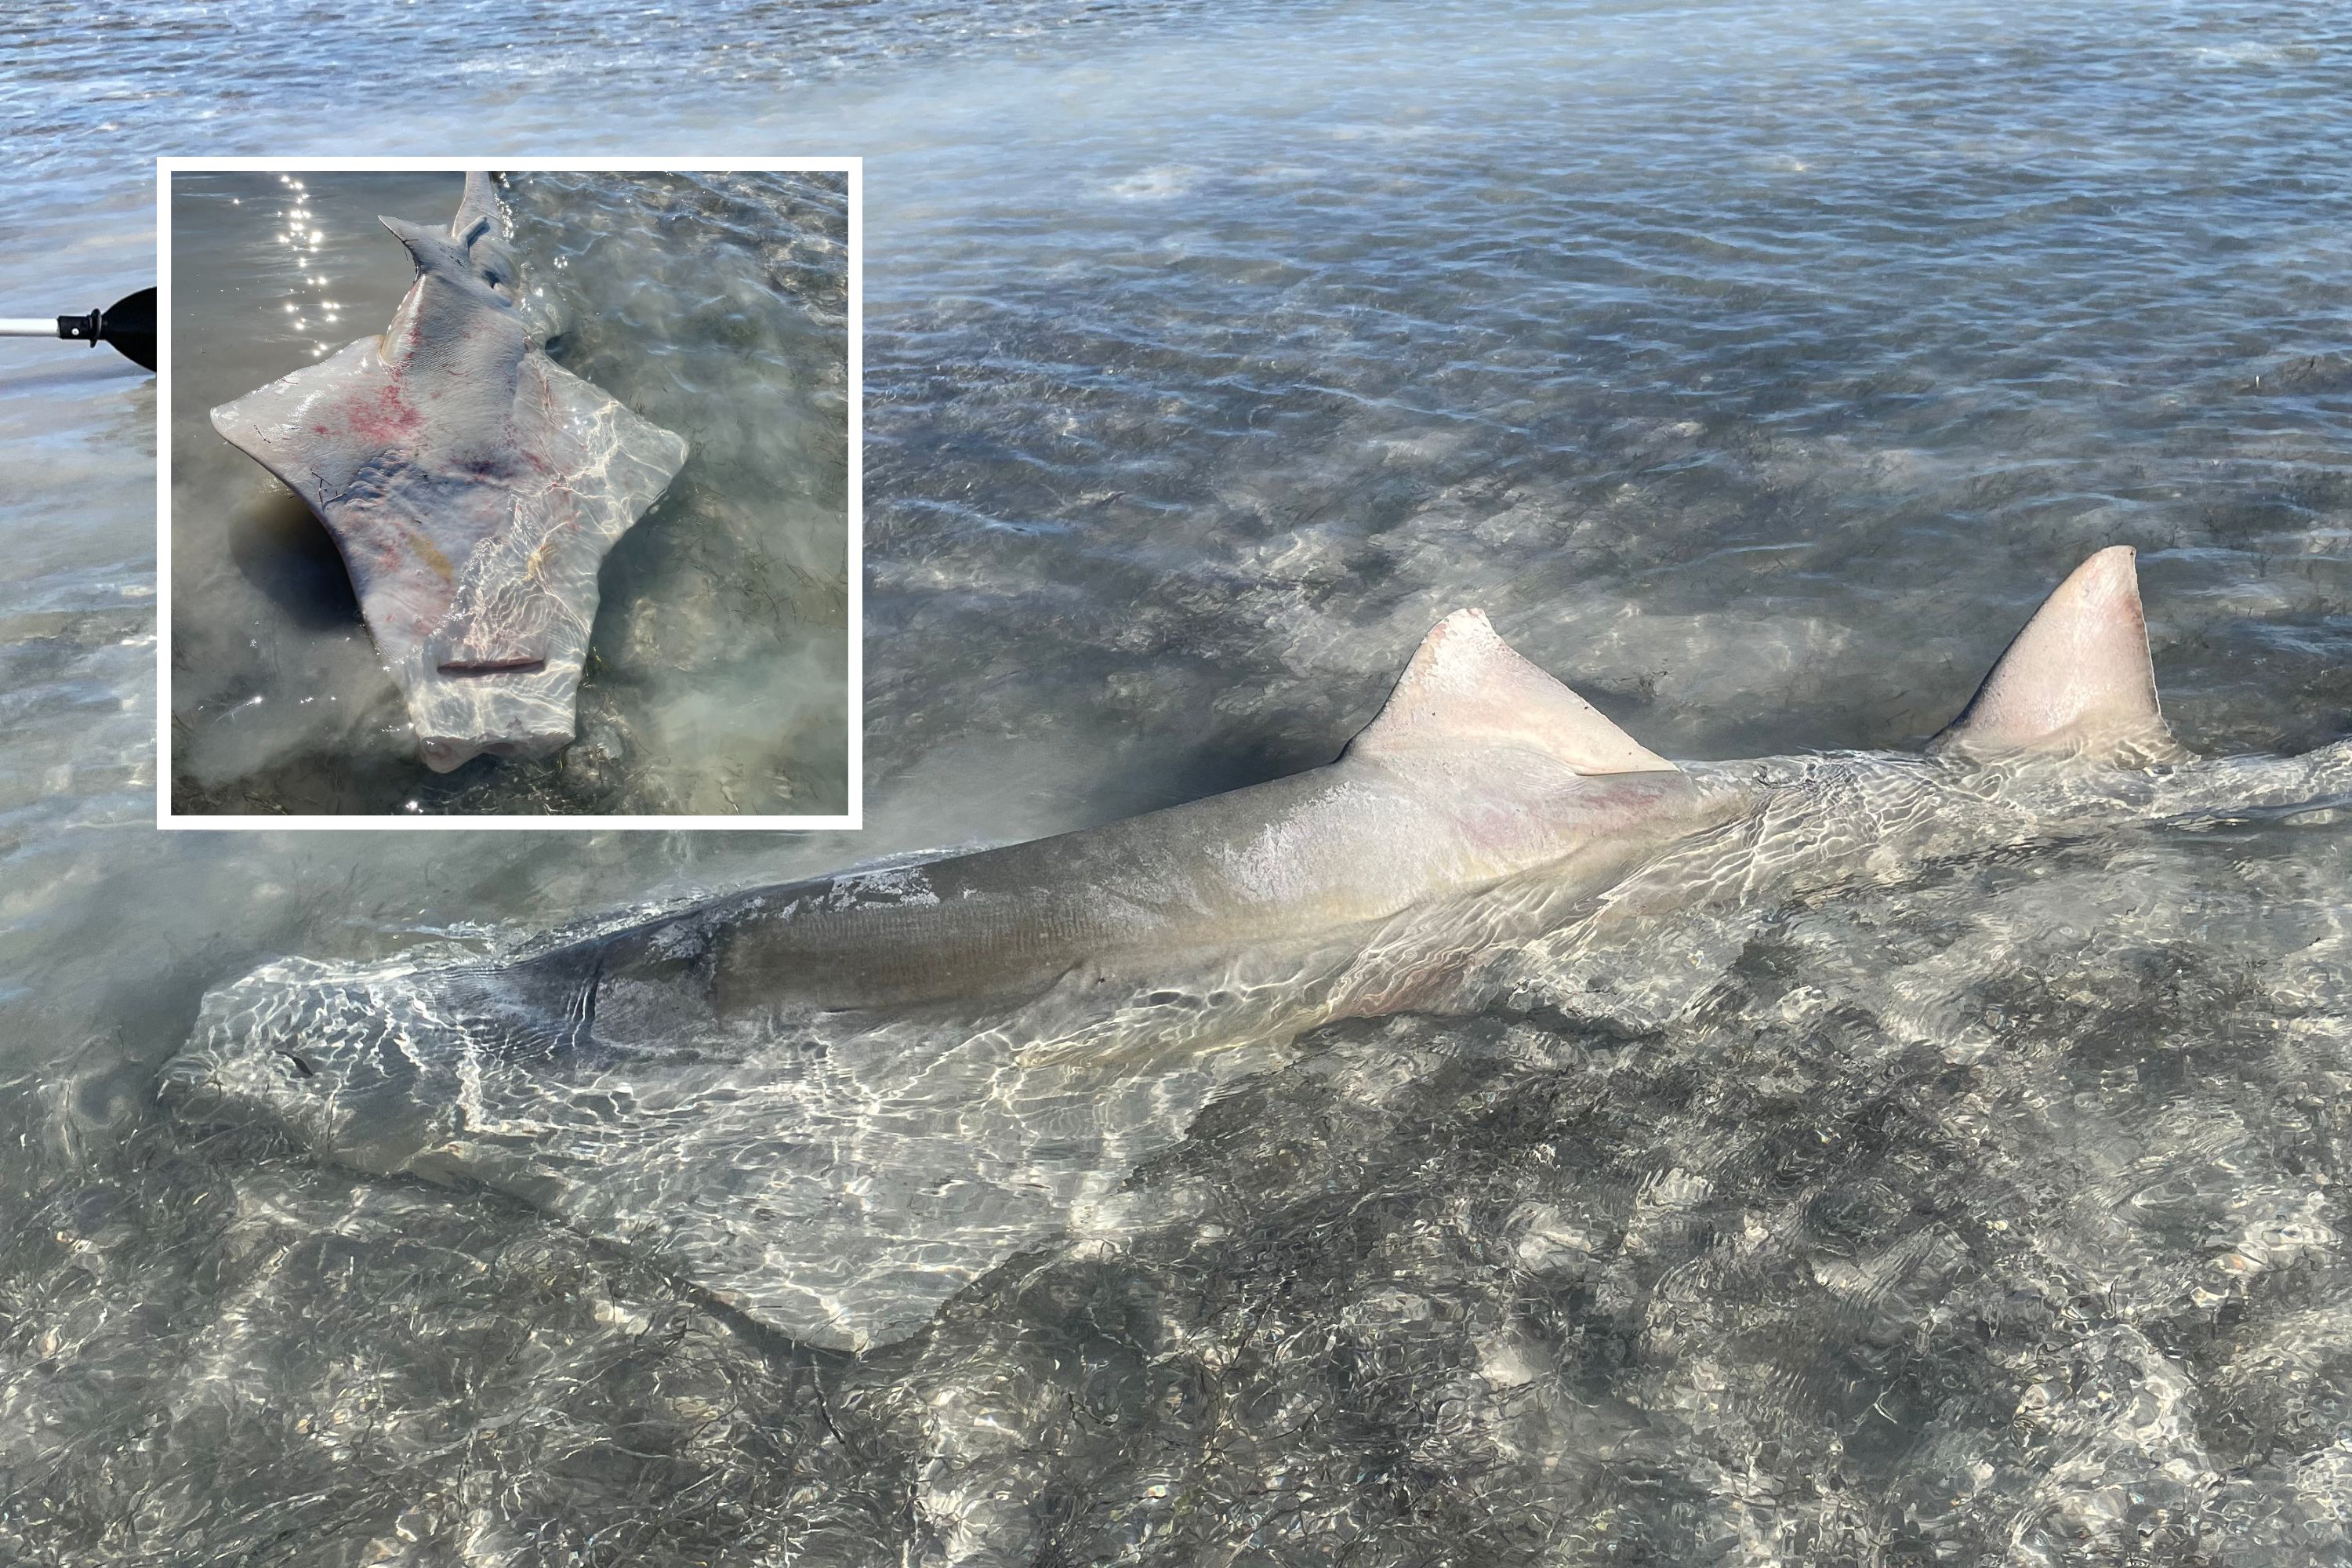 Endangered Sawfish Discovered Lifeless With Noticed Lower Off—$20,000 Reward for Information